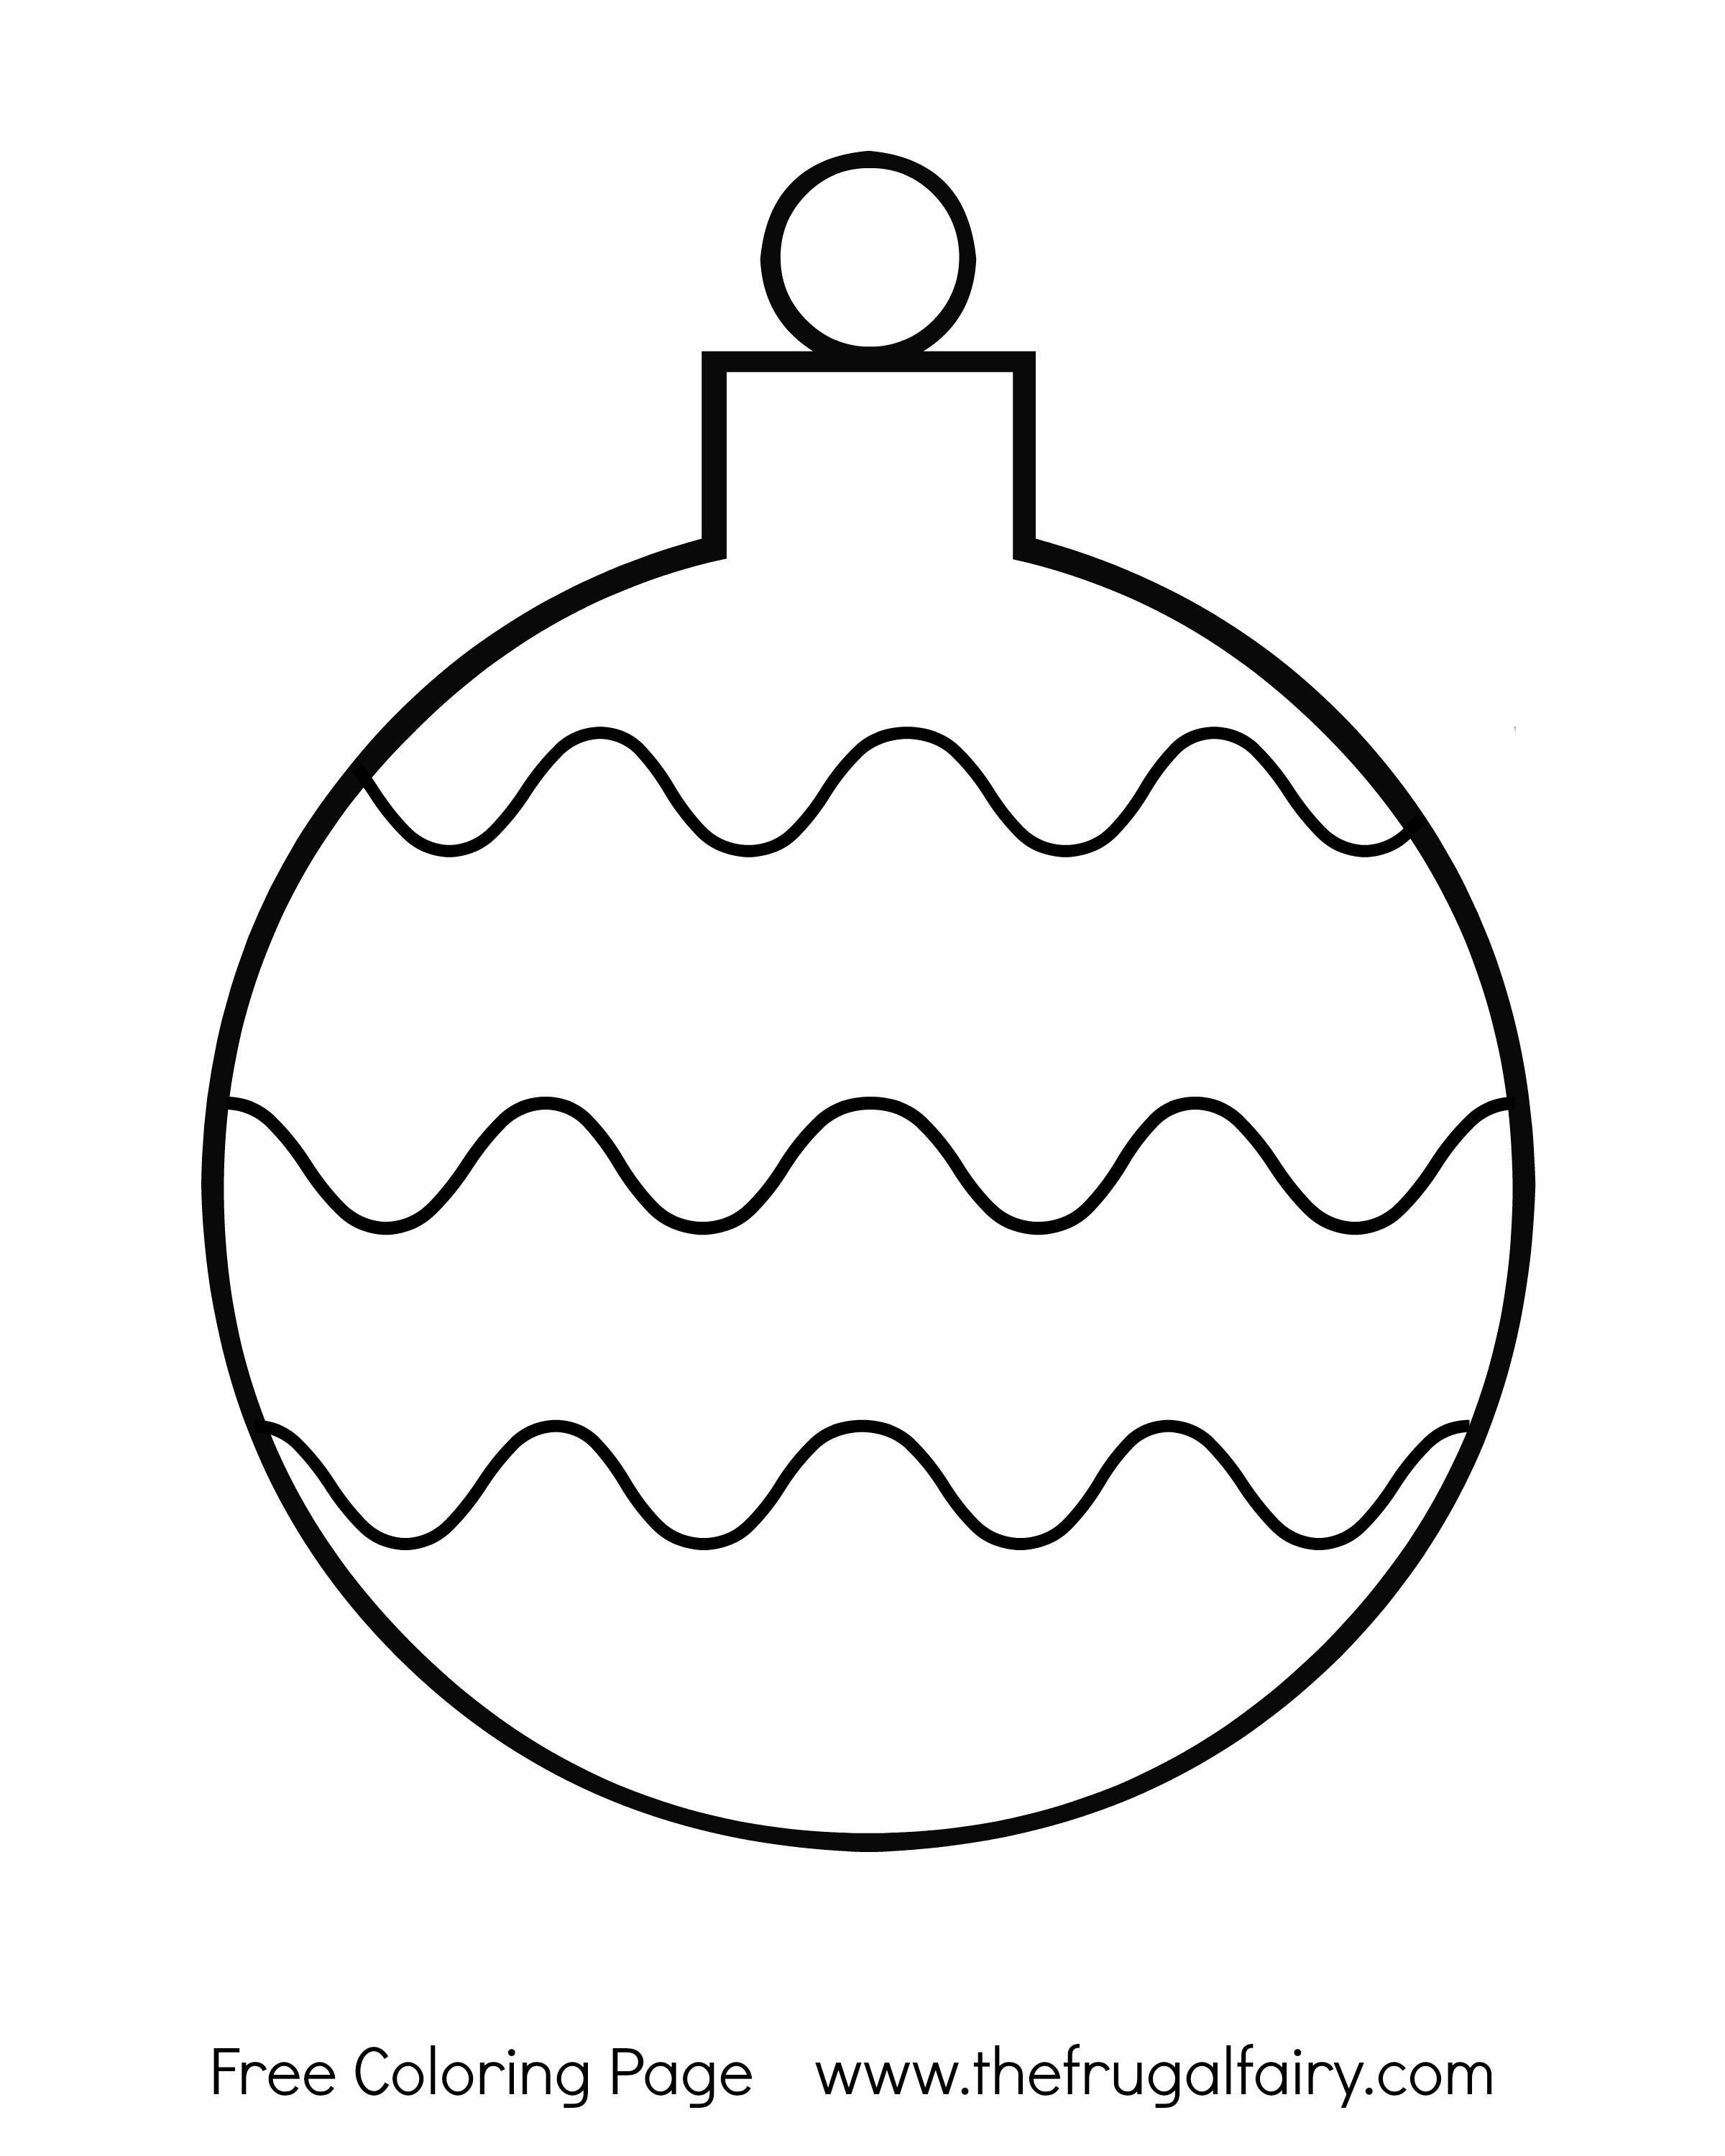 printable-ornament-coloring-pages-at-getcolorings-free-printable